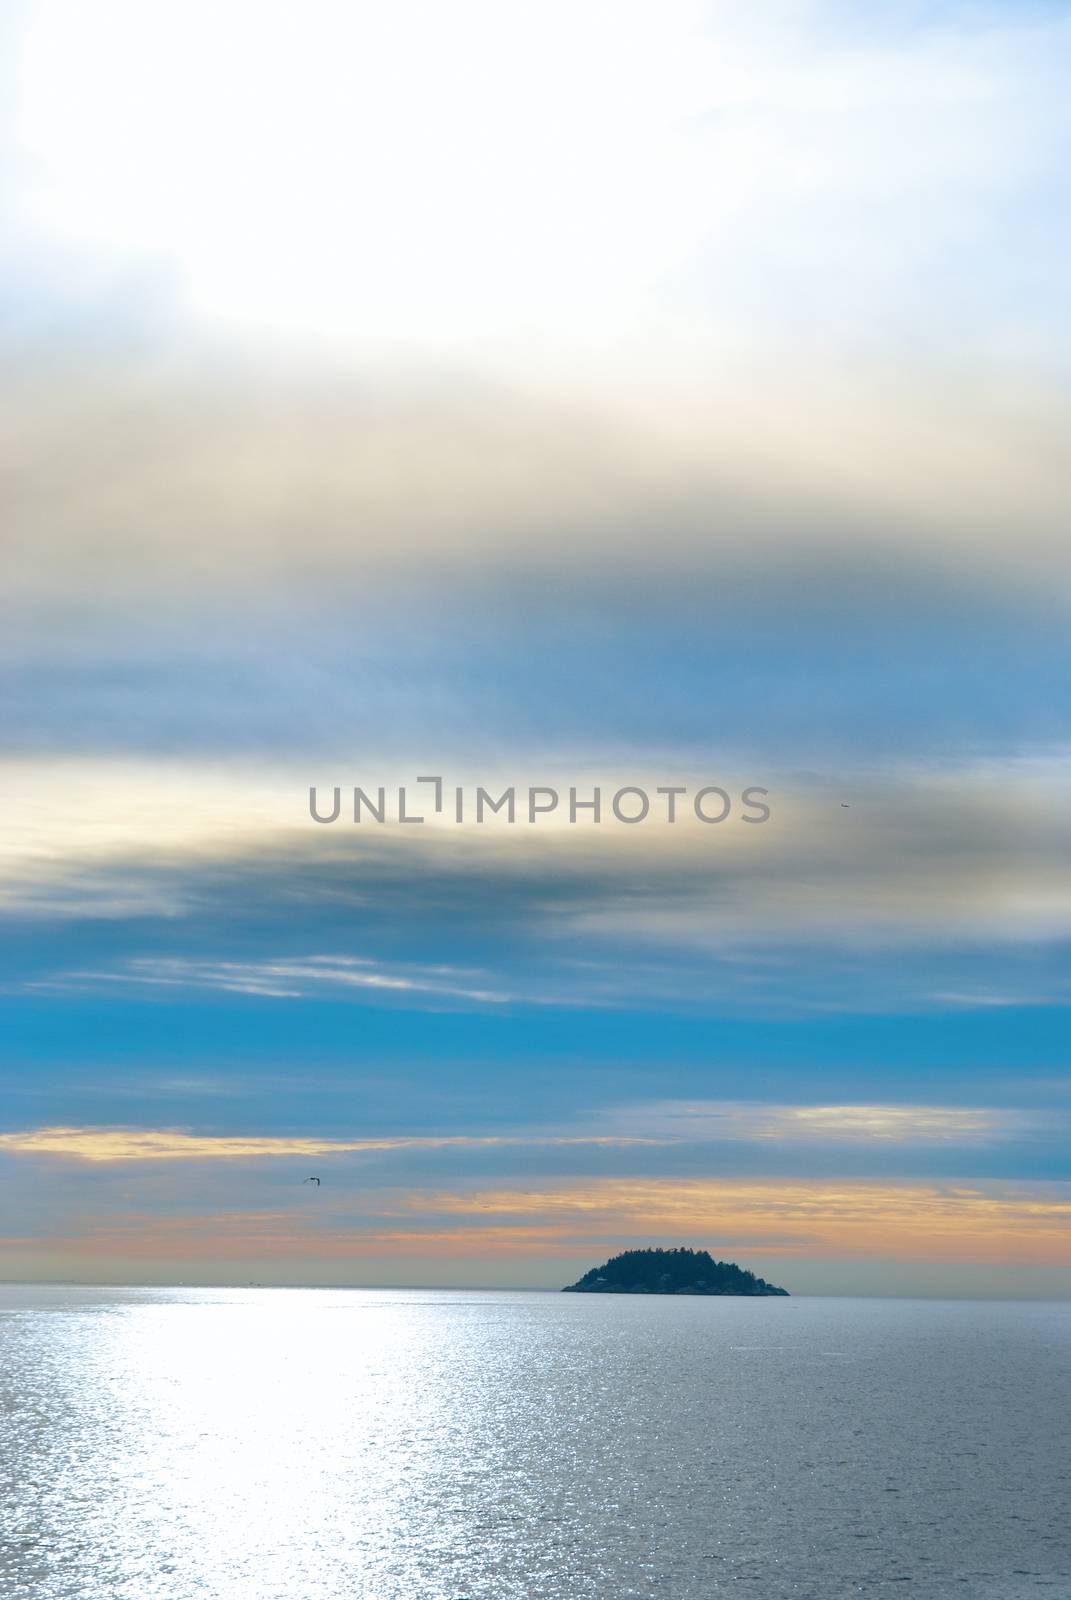 Small island in the sea. by vapi